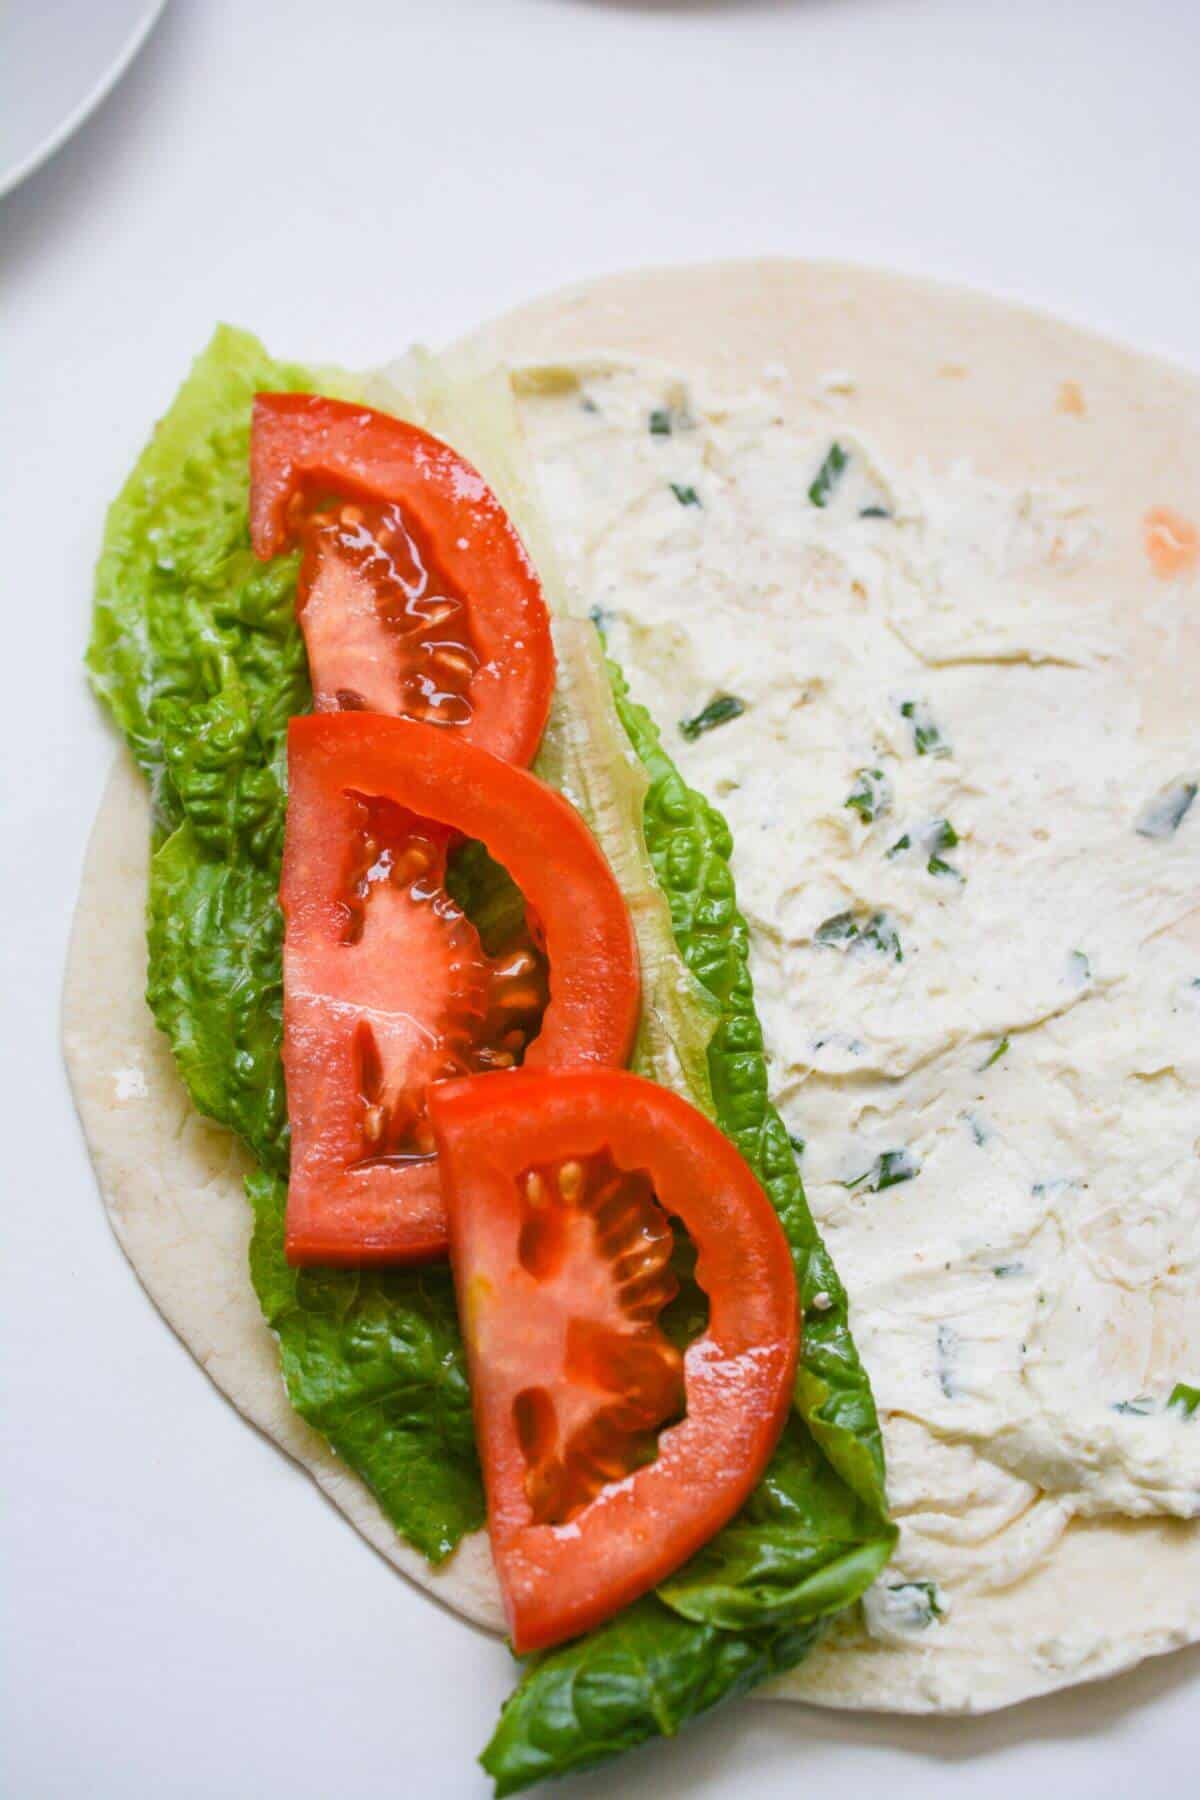 A tortilla with tomatoes and lettuce on it.